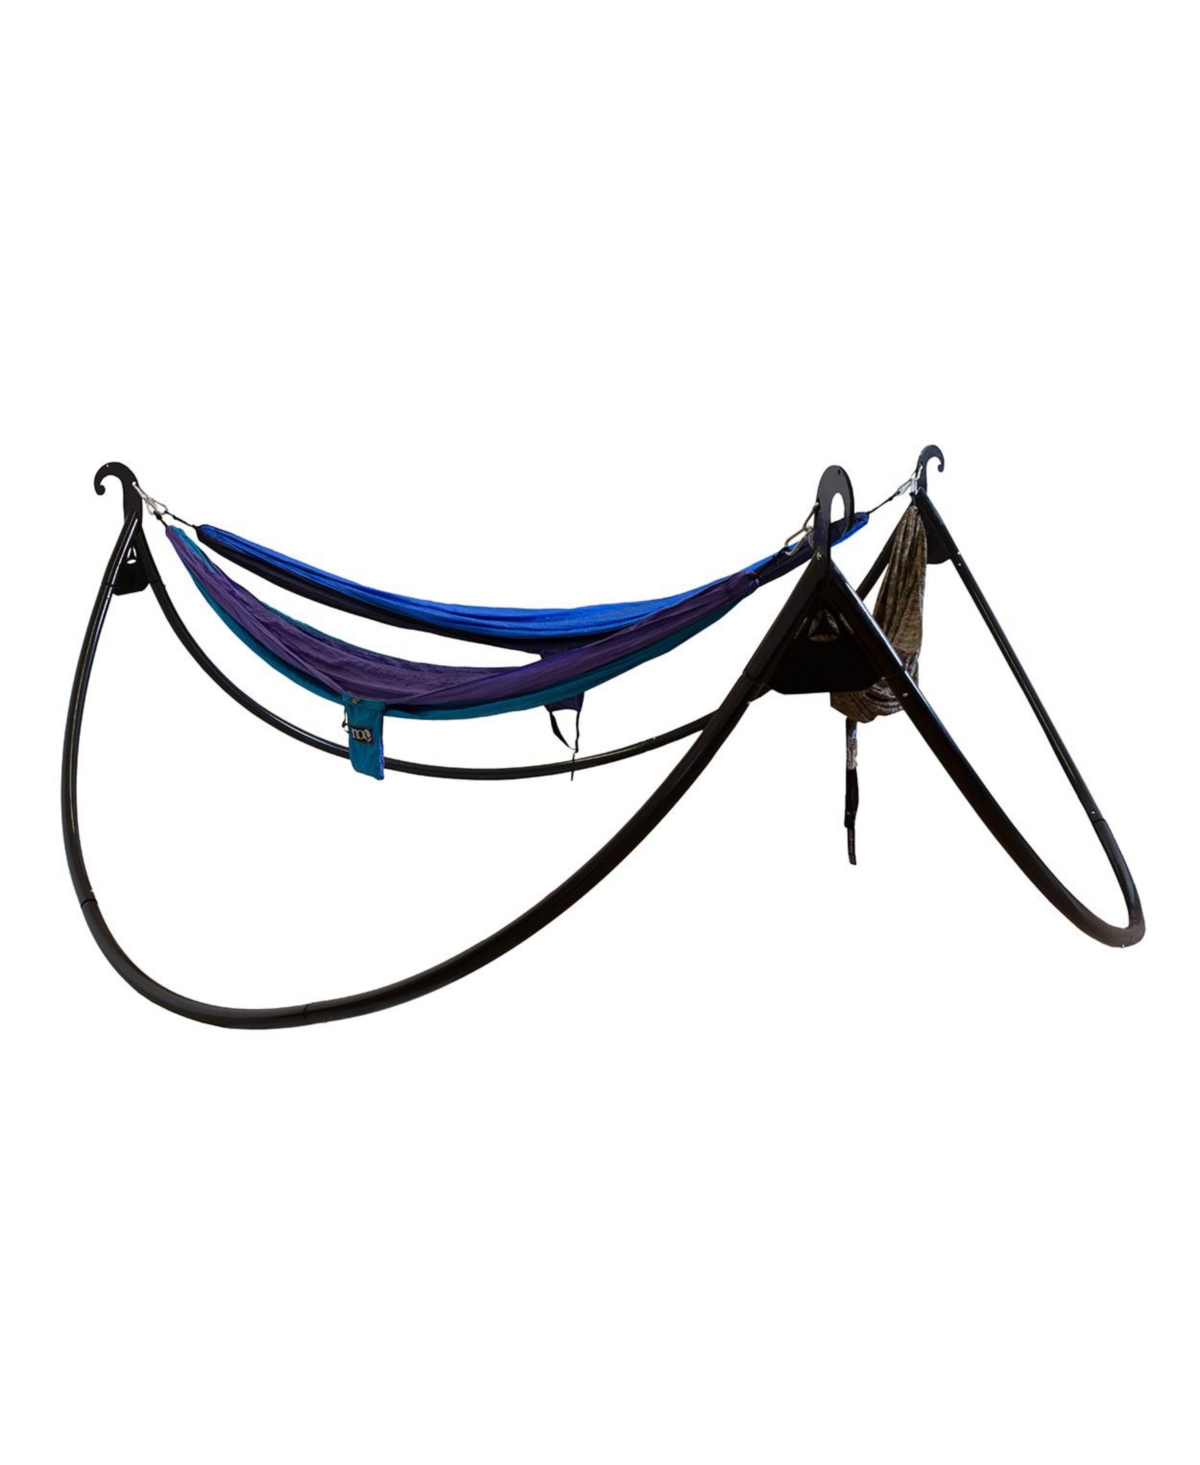 pod Hammock Stand - Outdoor Stand for Three Hammocks - Triple Hammock Stand for Camping, Traveling, Festivals, Picnics, or the Beach - Charcoal -